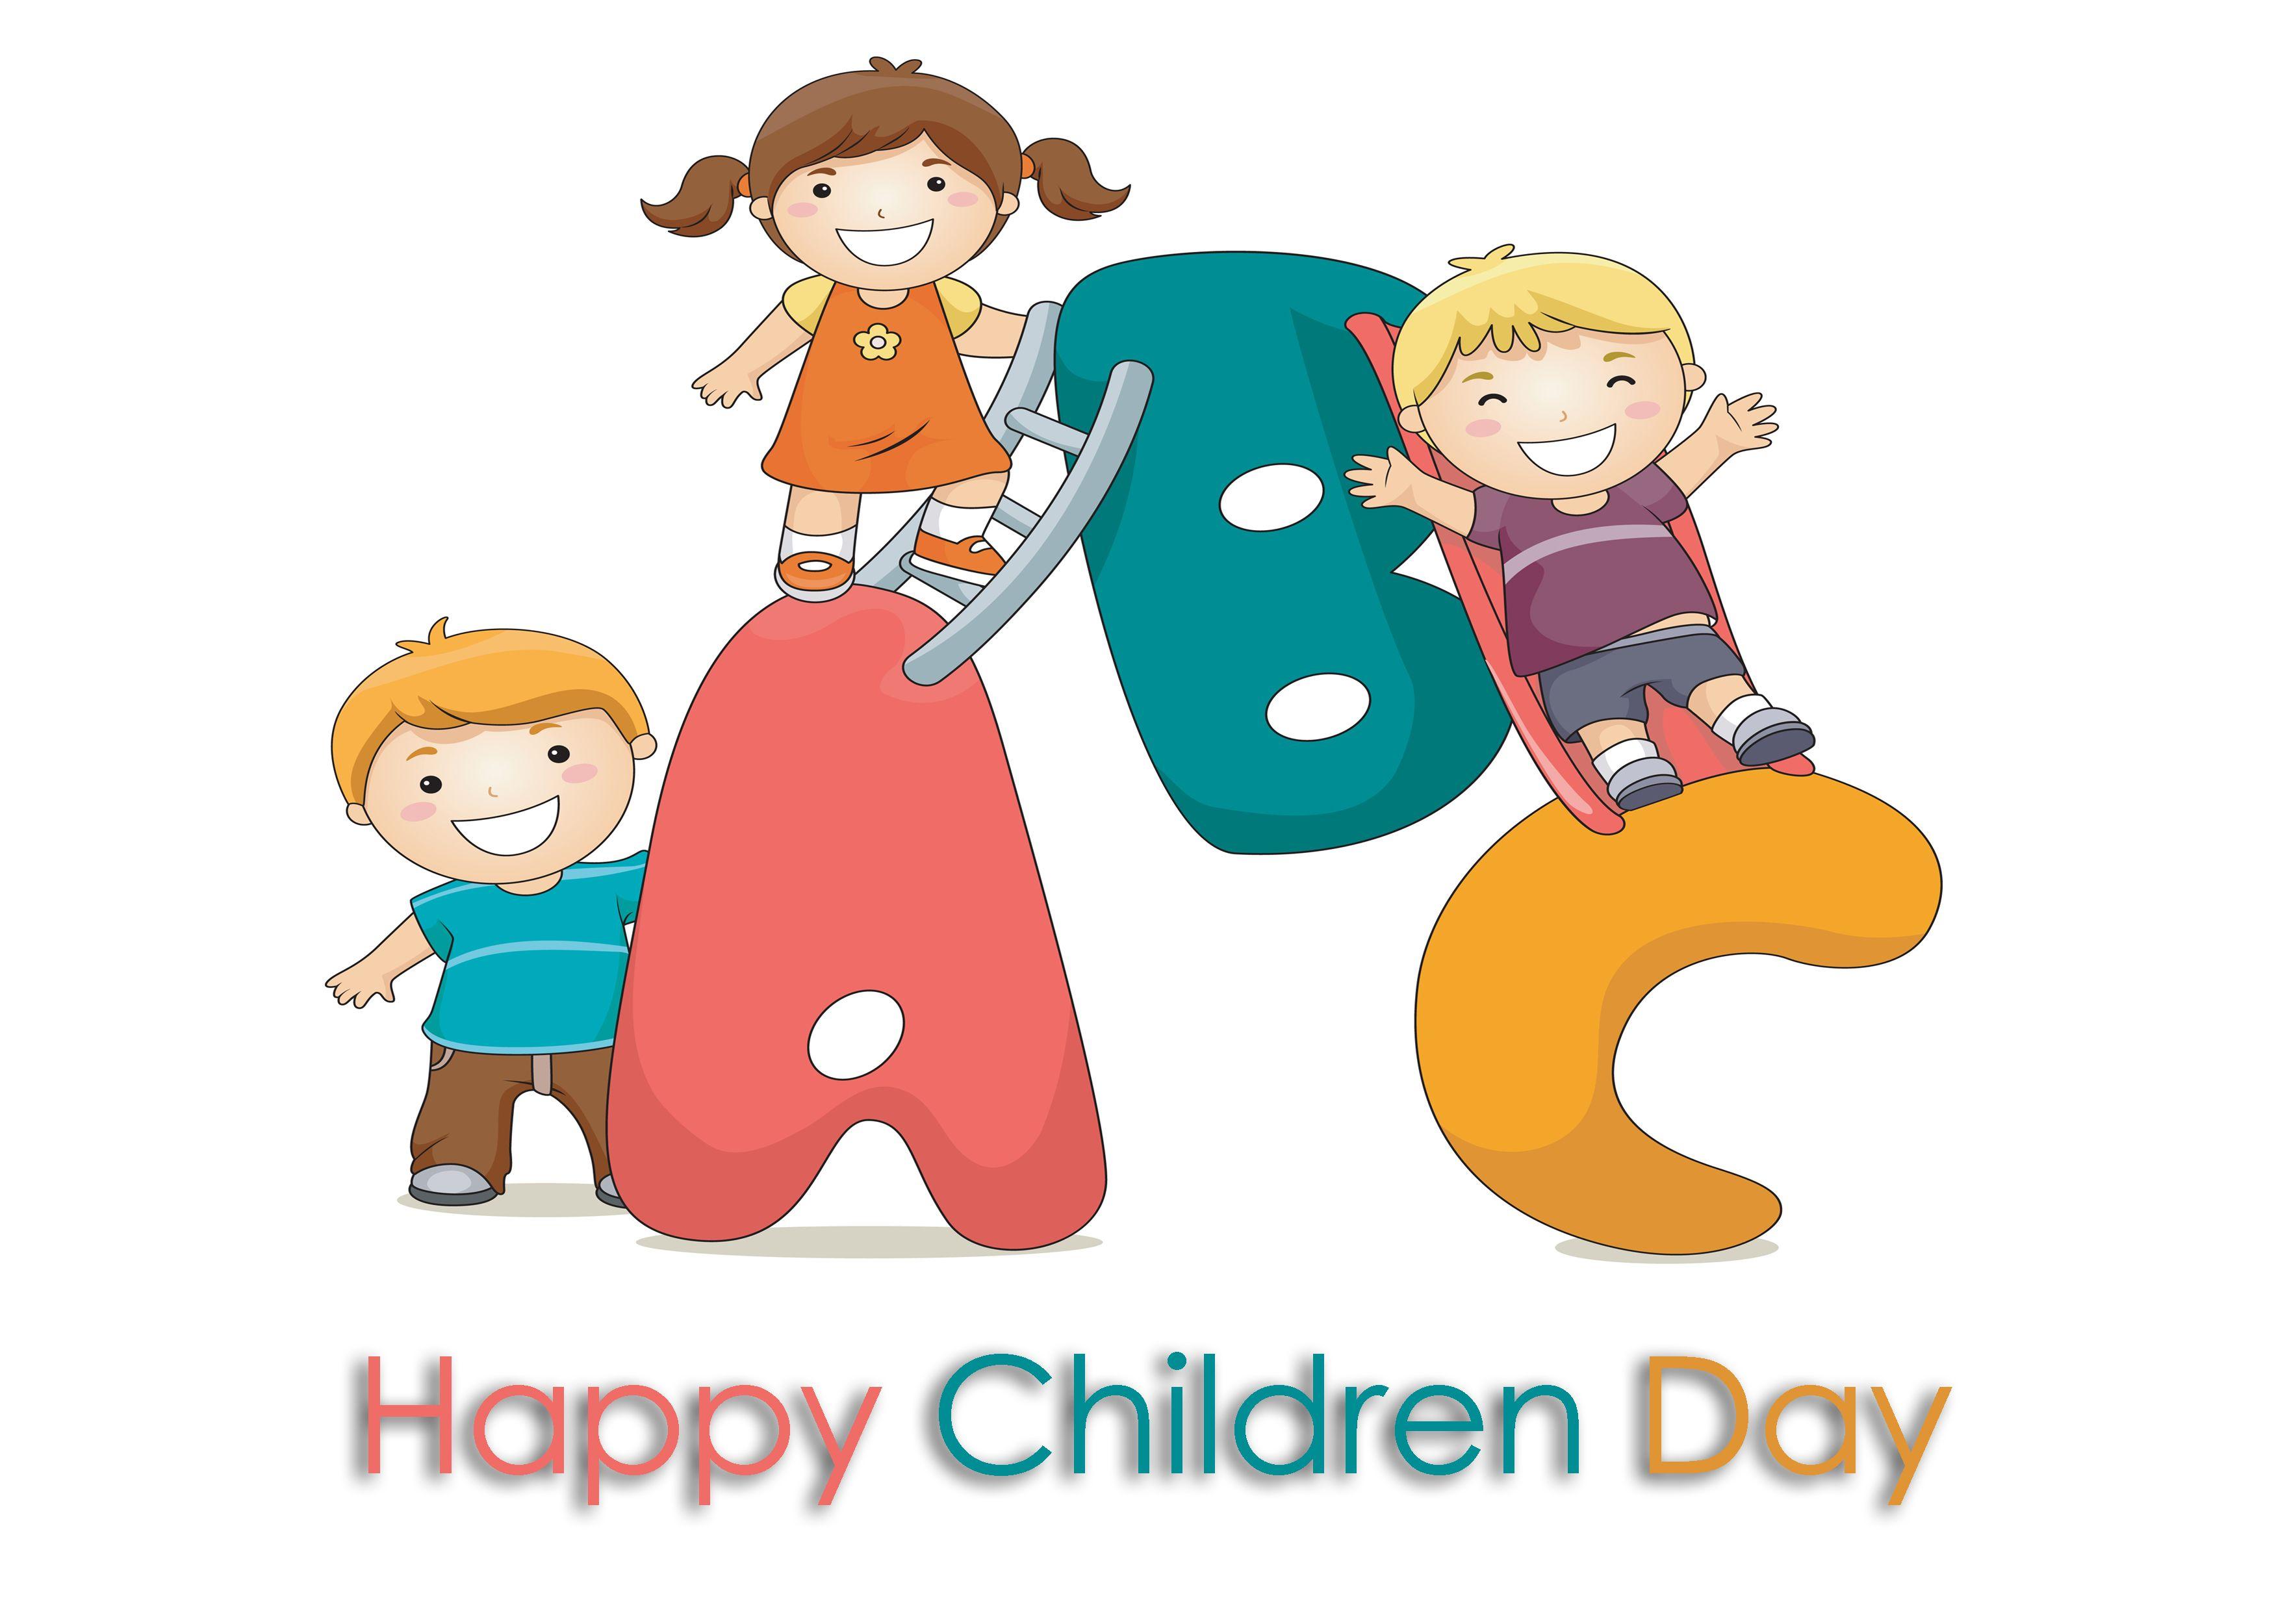 Happy Childrens day HD image Happy Childrens Day, HD